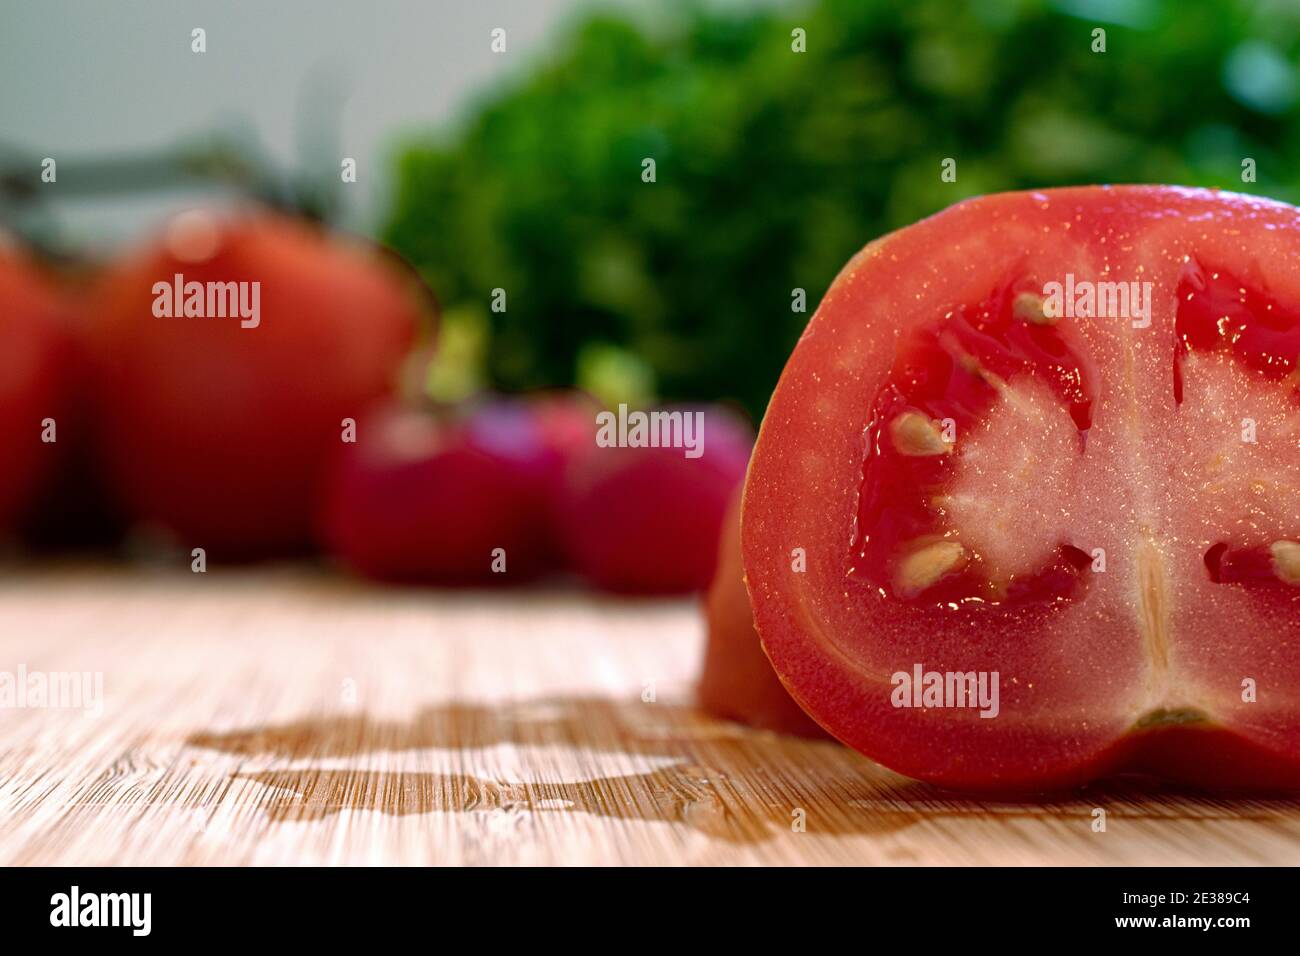 Close up of a tomato freshly cut in half arranged among healthy green lettuce and radishes Stock Photo